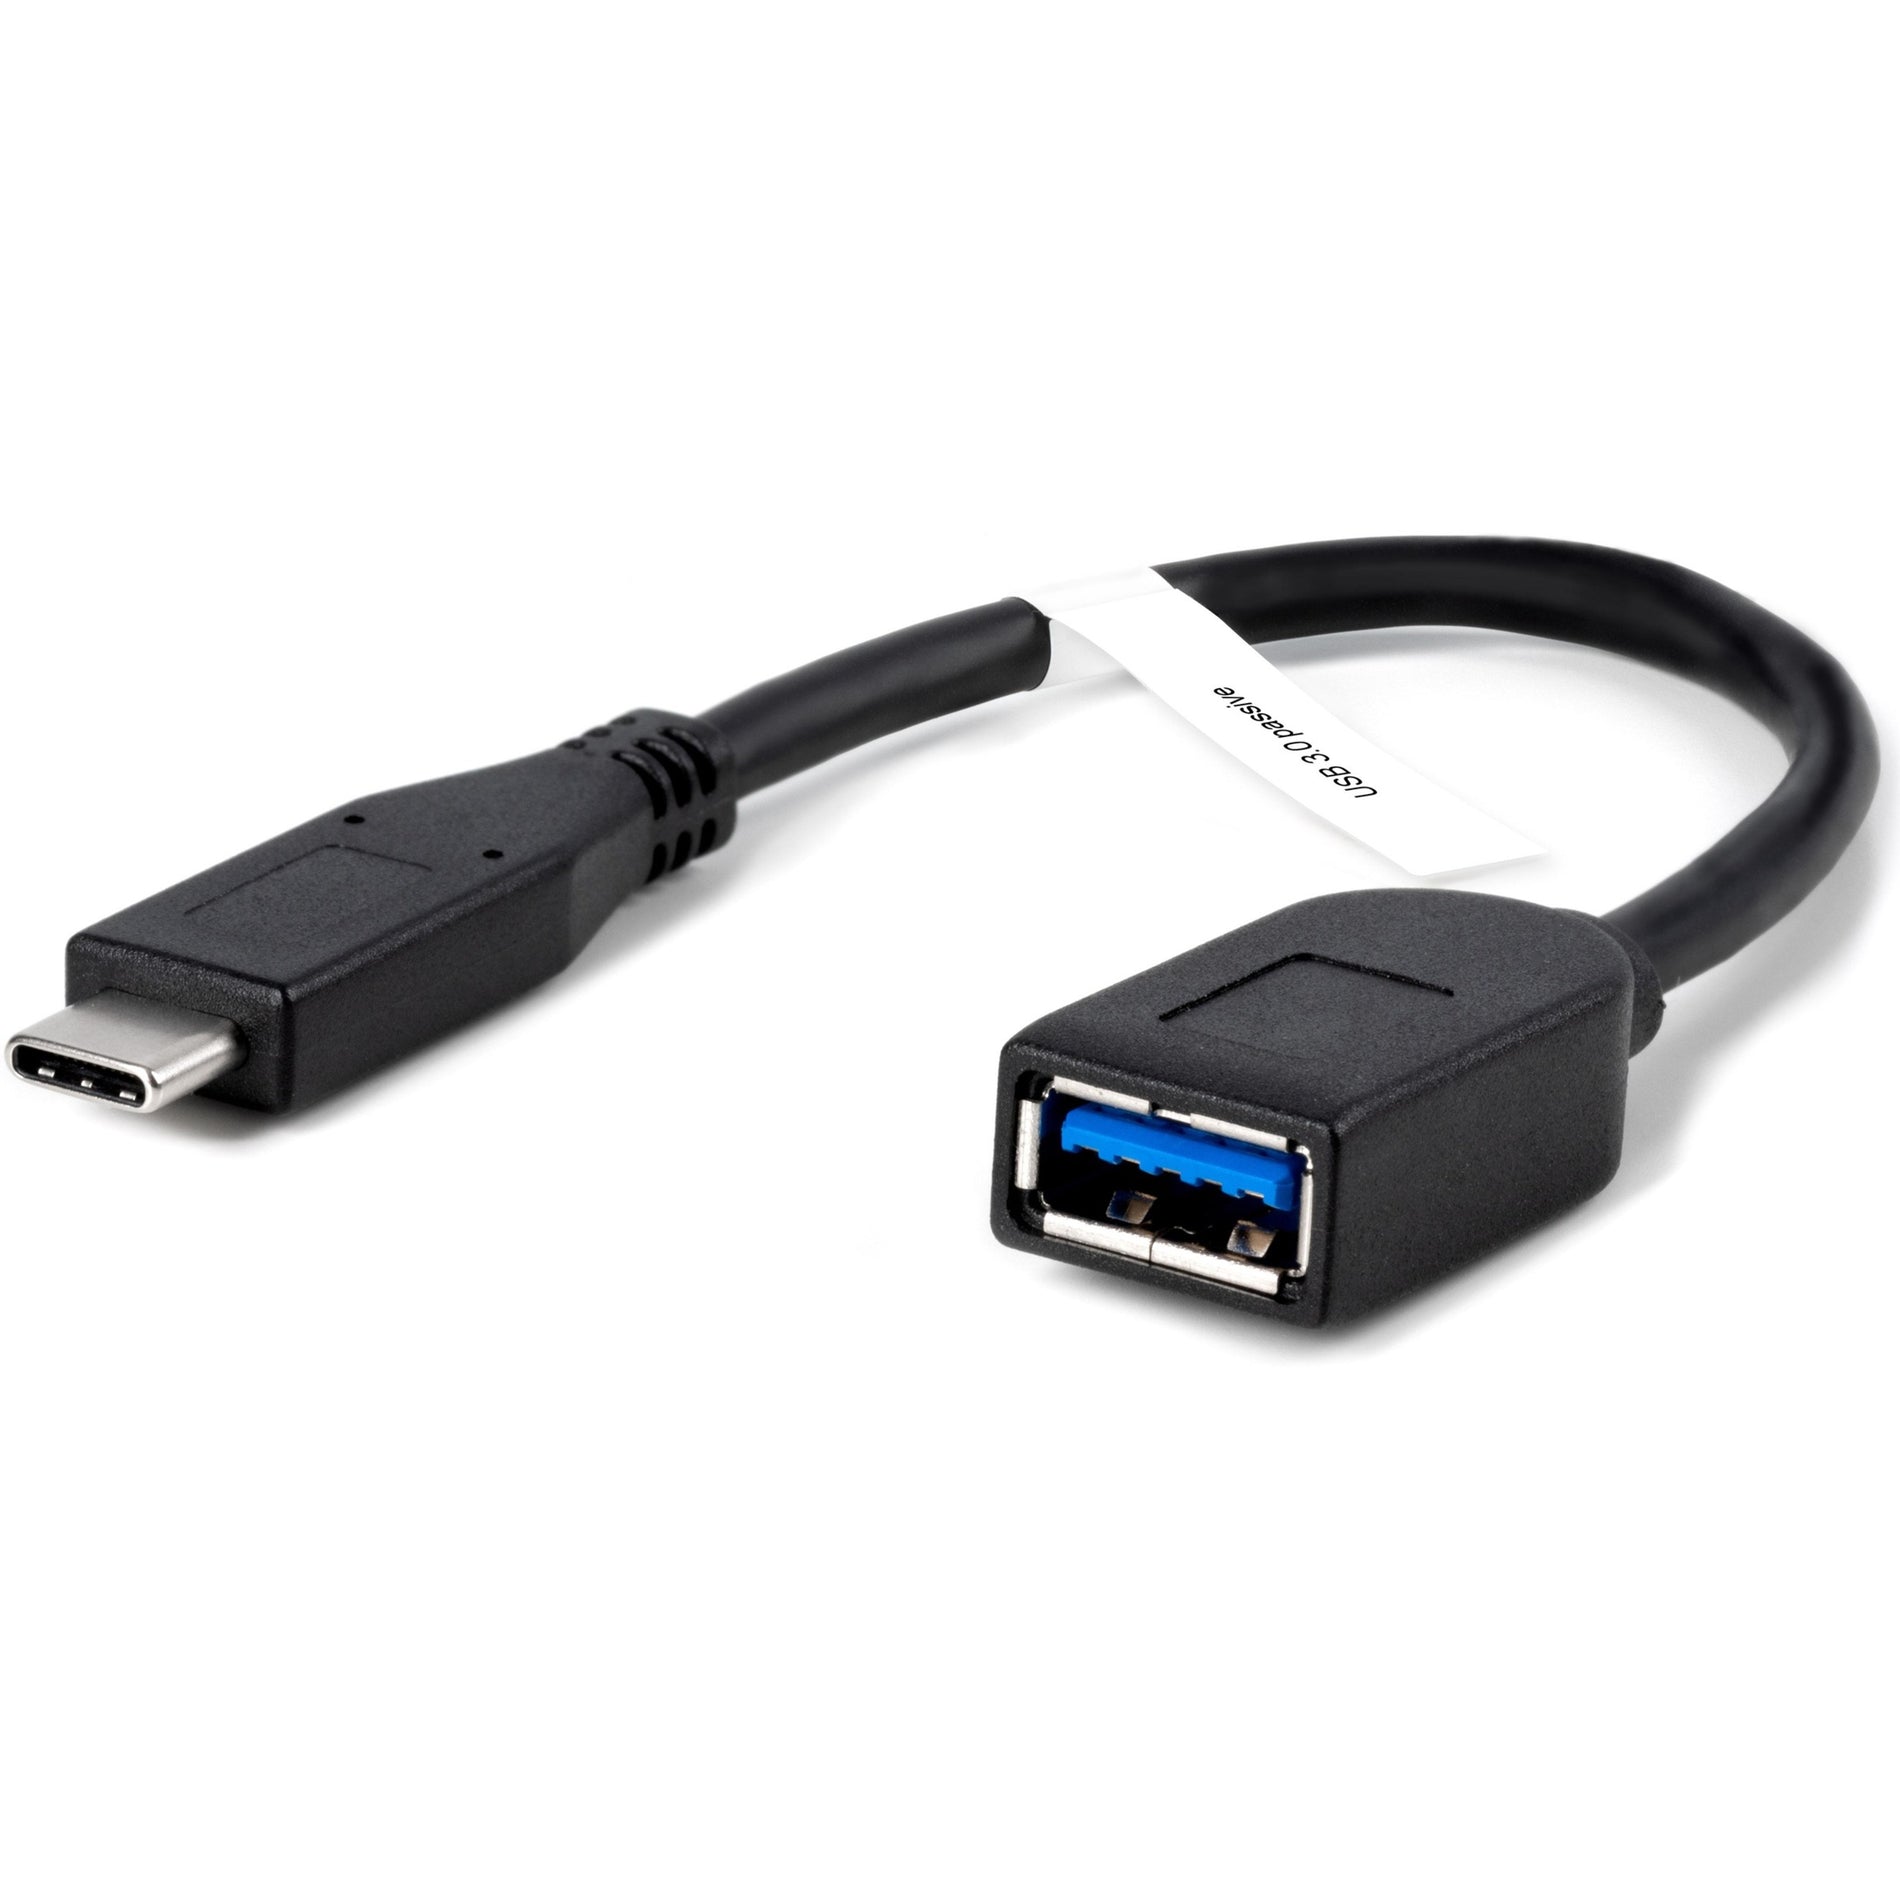 Plugable USBC-AF3 USB 3.0 Passive Type-A to Type-C Cable (6in/15cm), Data Transfer Cable, 5 Gbit/s